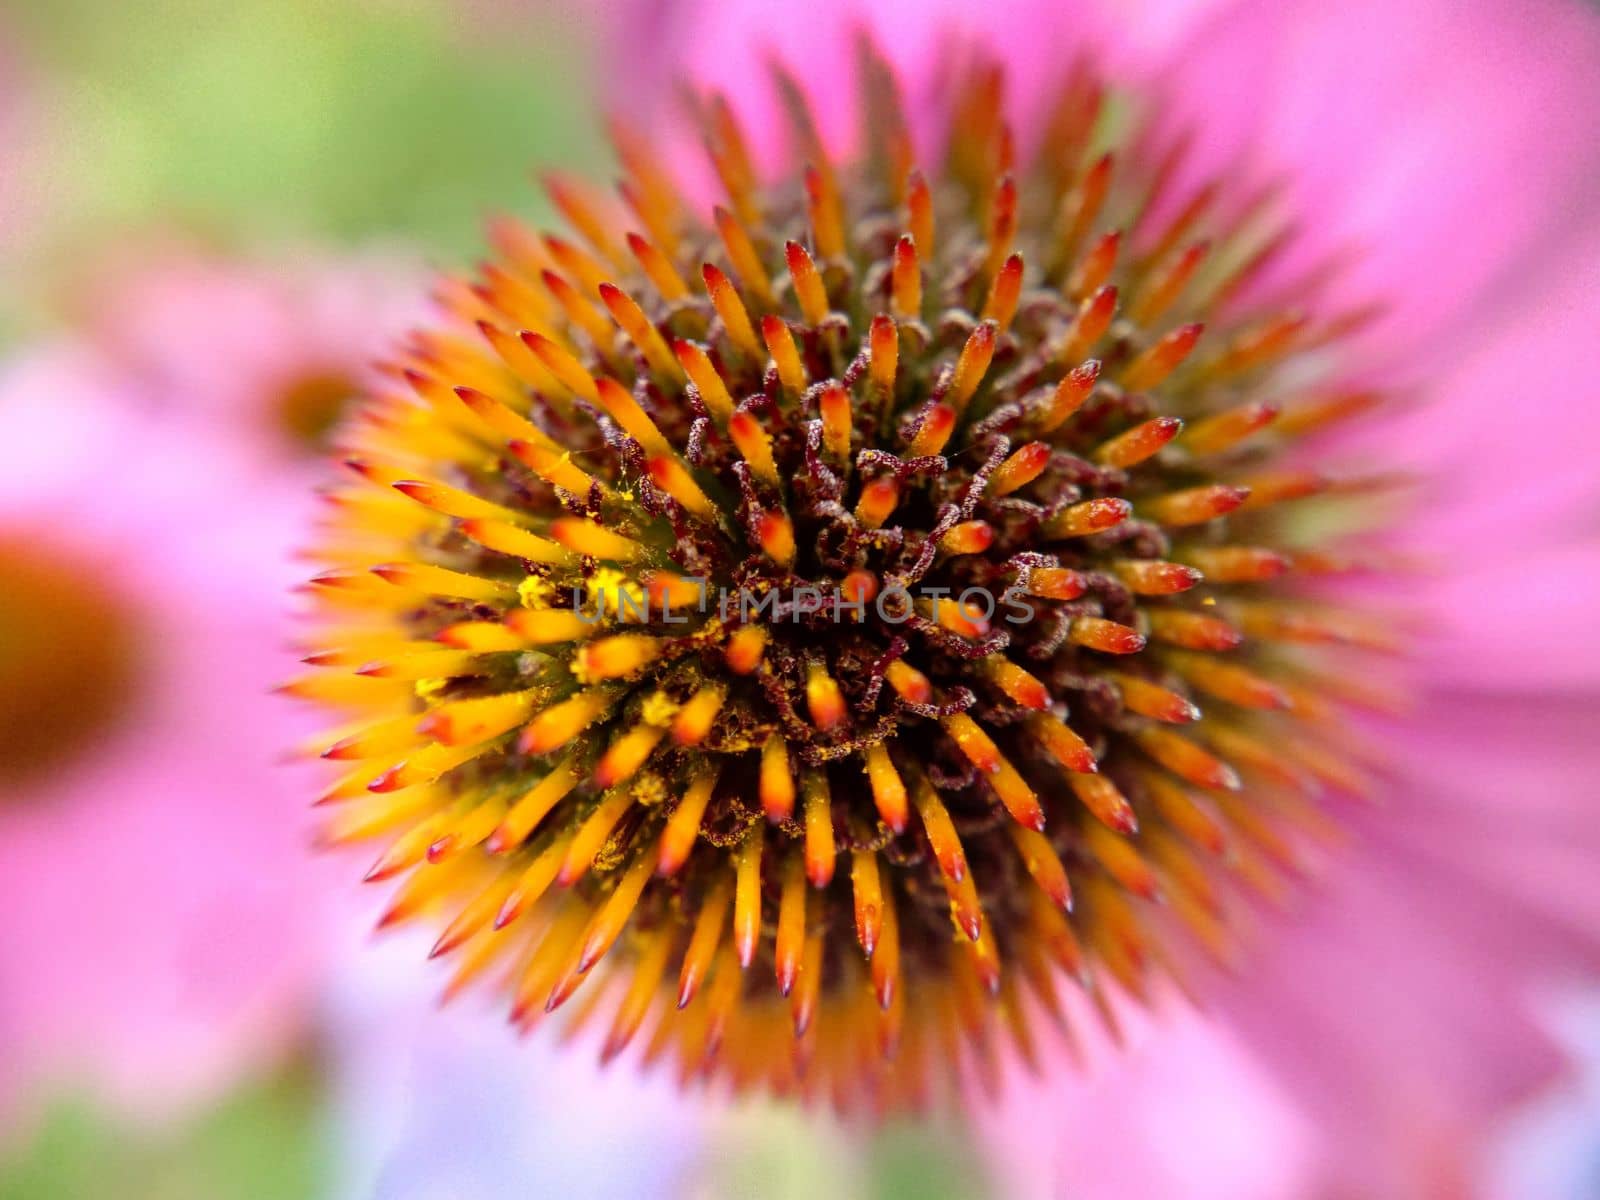 Macrophotography of an echinacea flower with its petals down by Mastak80